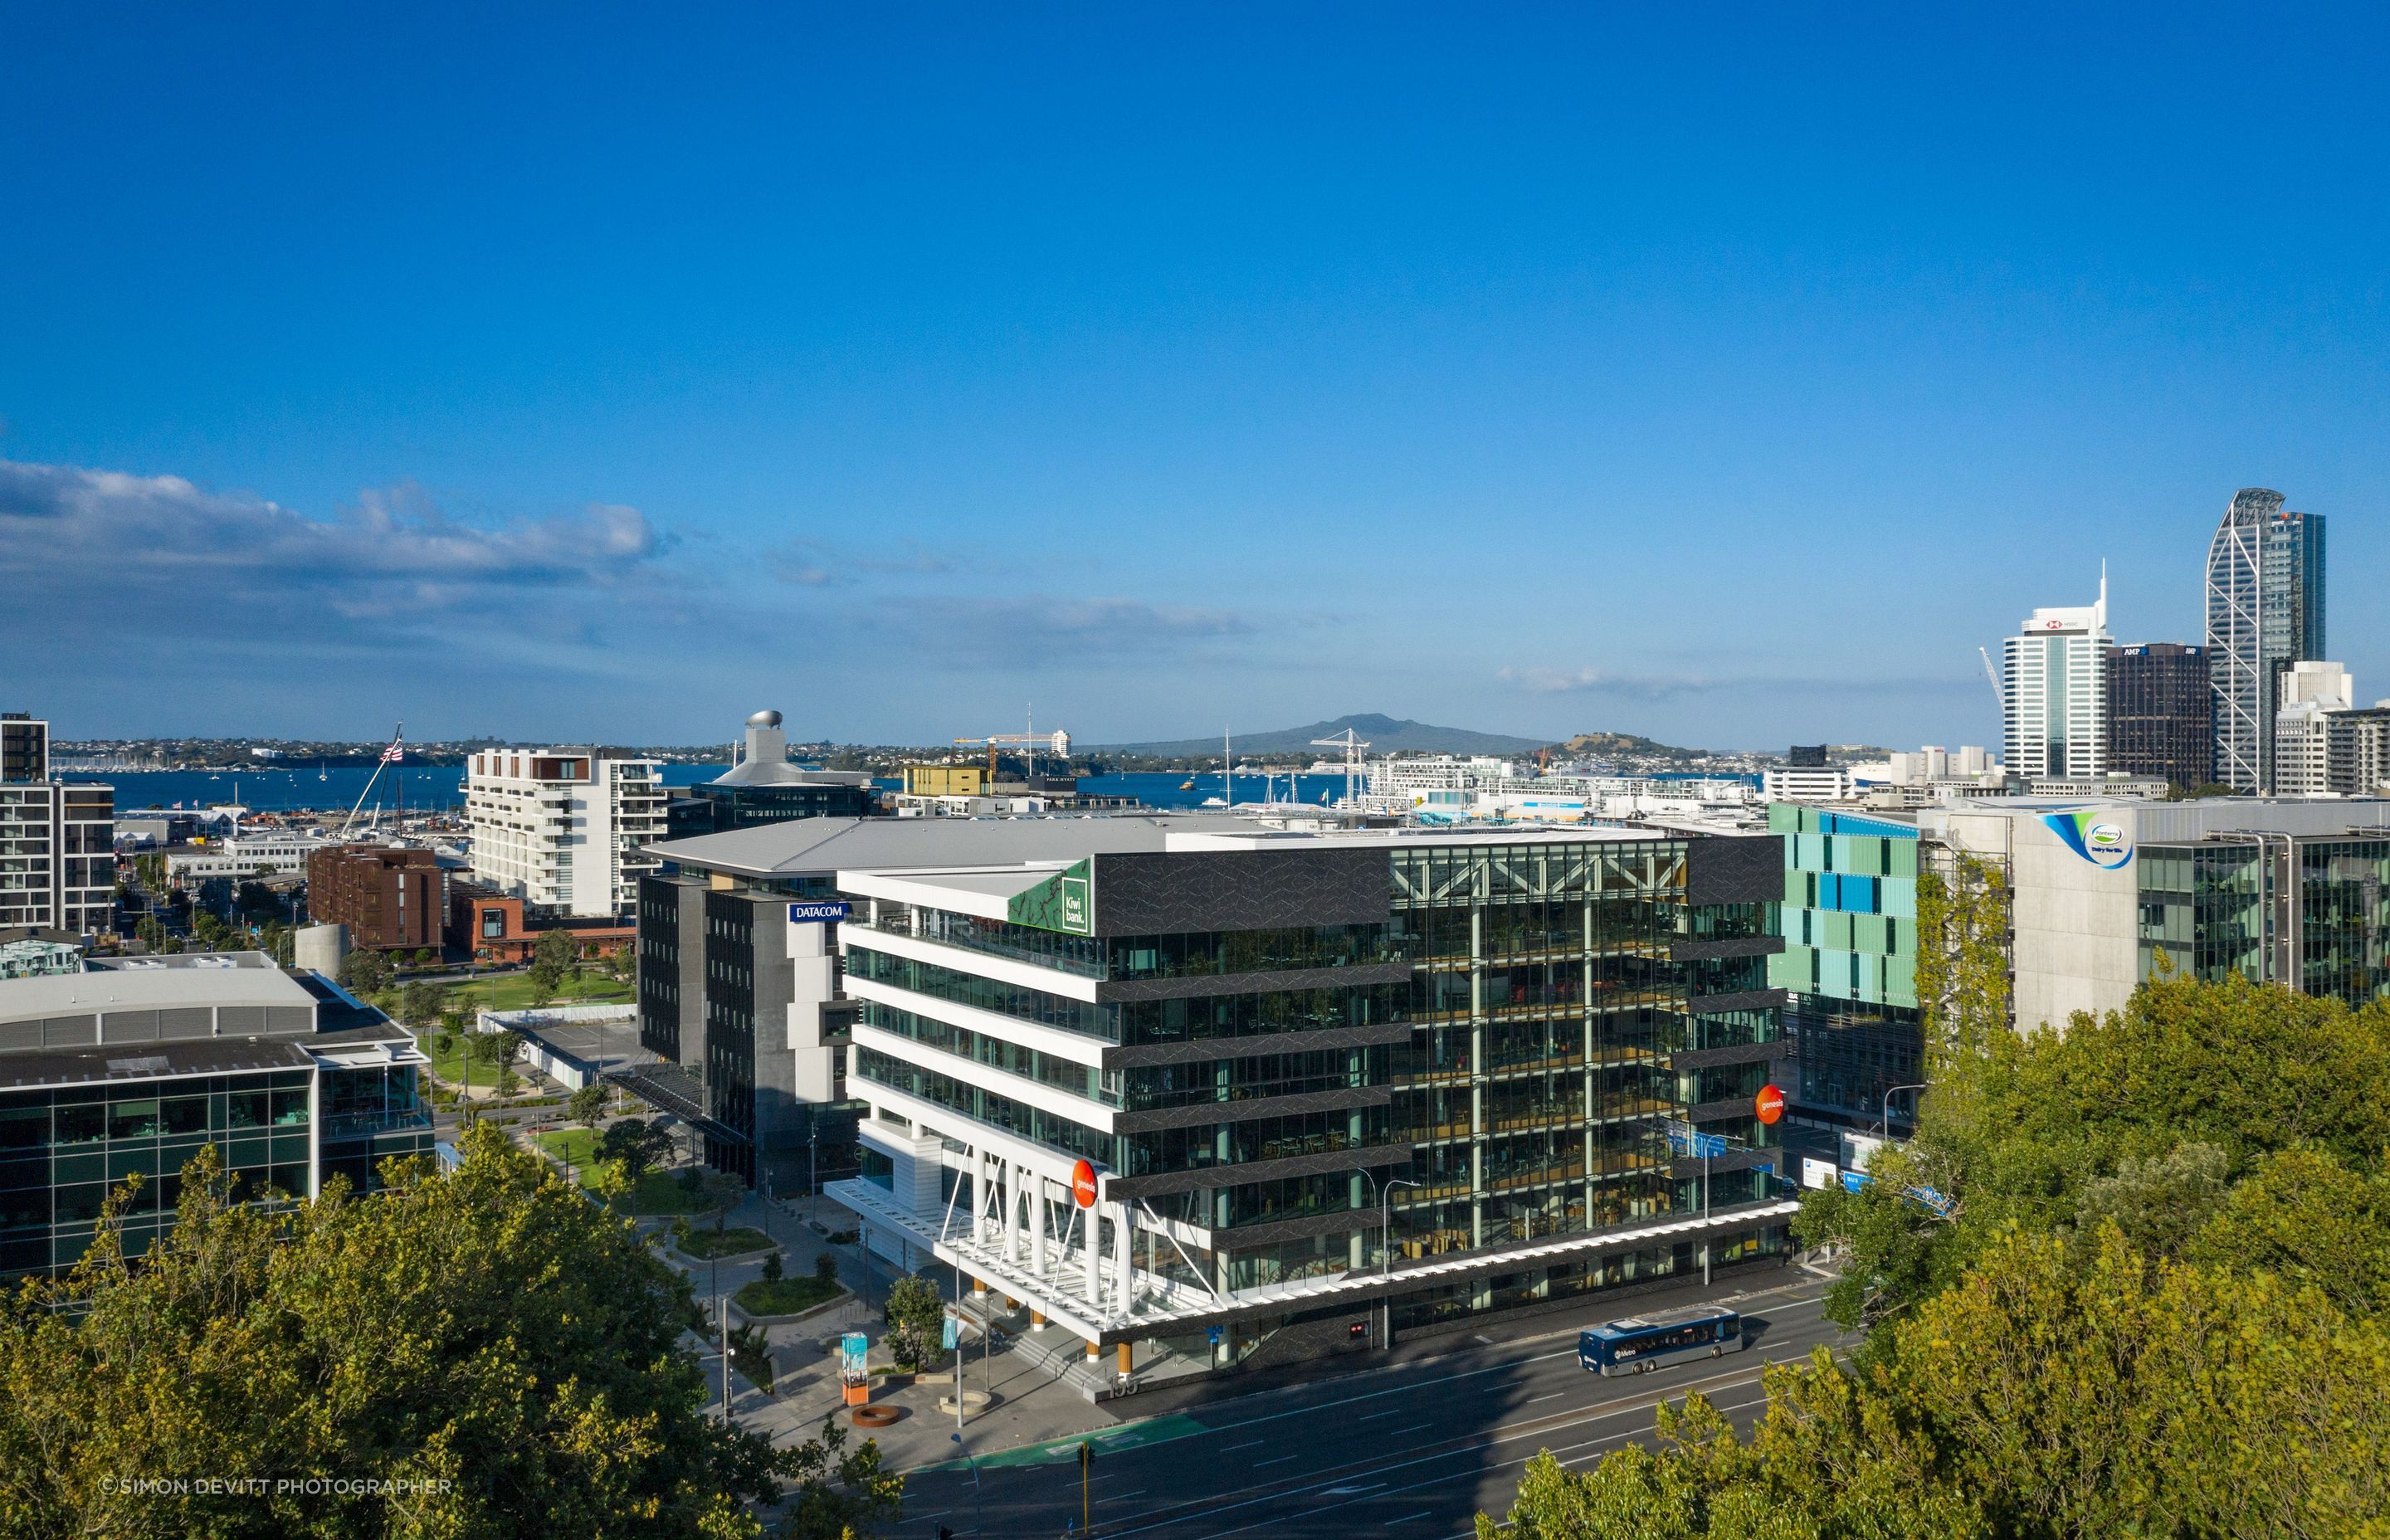 Sitting at the southern end of Daldy Street—which connects Wynyard Point to Victoria Park—Te Kupenga addresses one of the main entries to Auckland's revamped waterfront precinct.